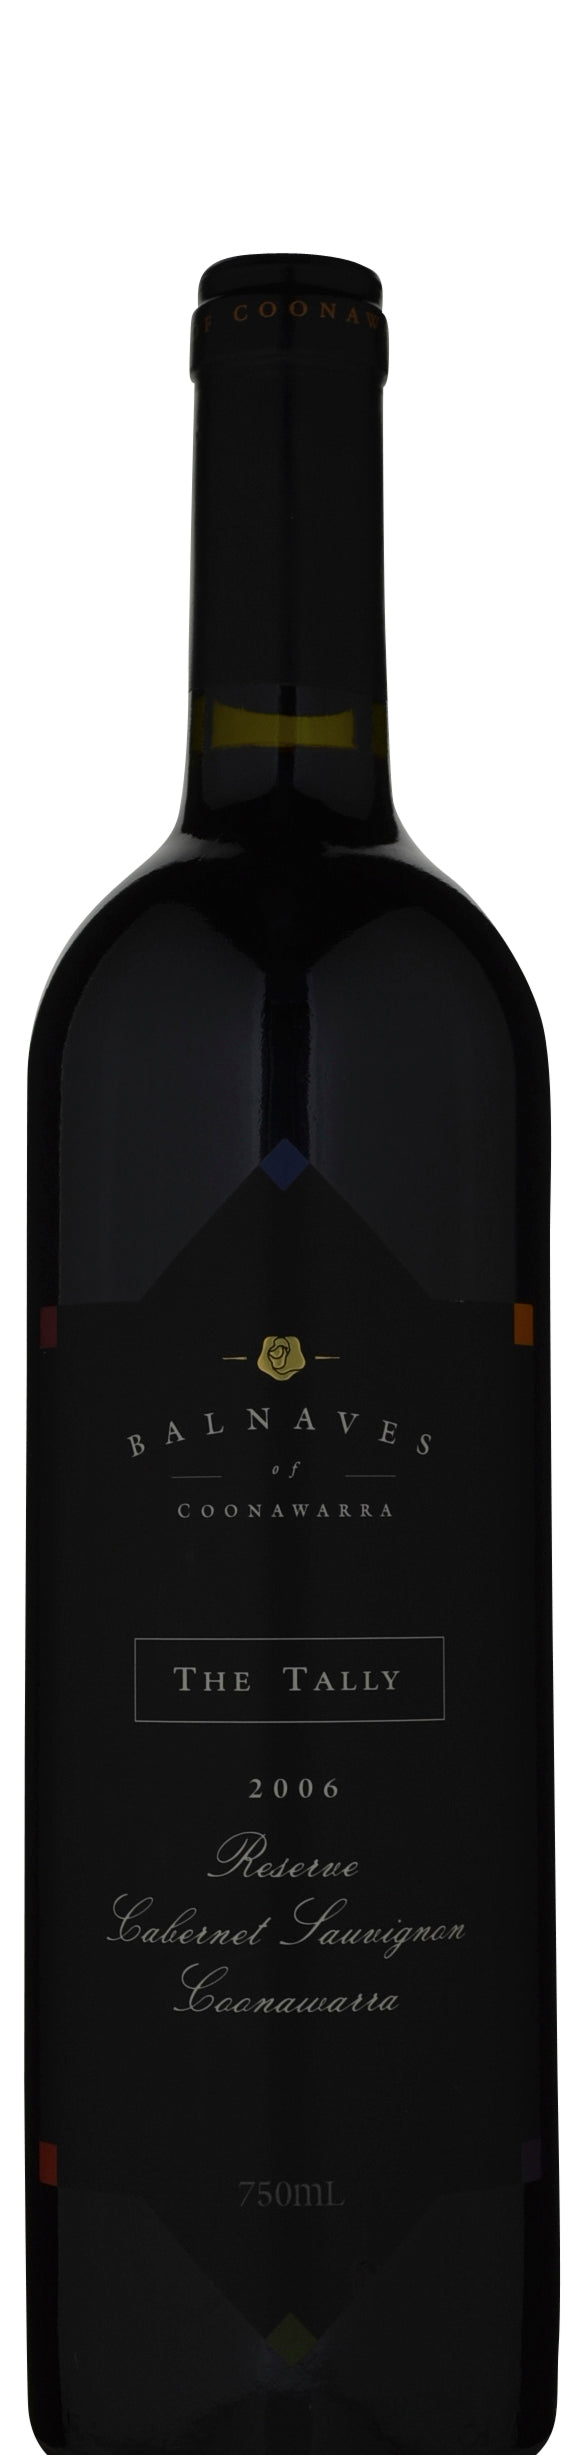 Balnaves of Coonawarra The Tally Reserve Cabernet Sauvignon 2006